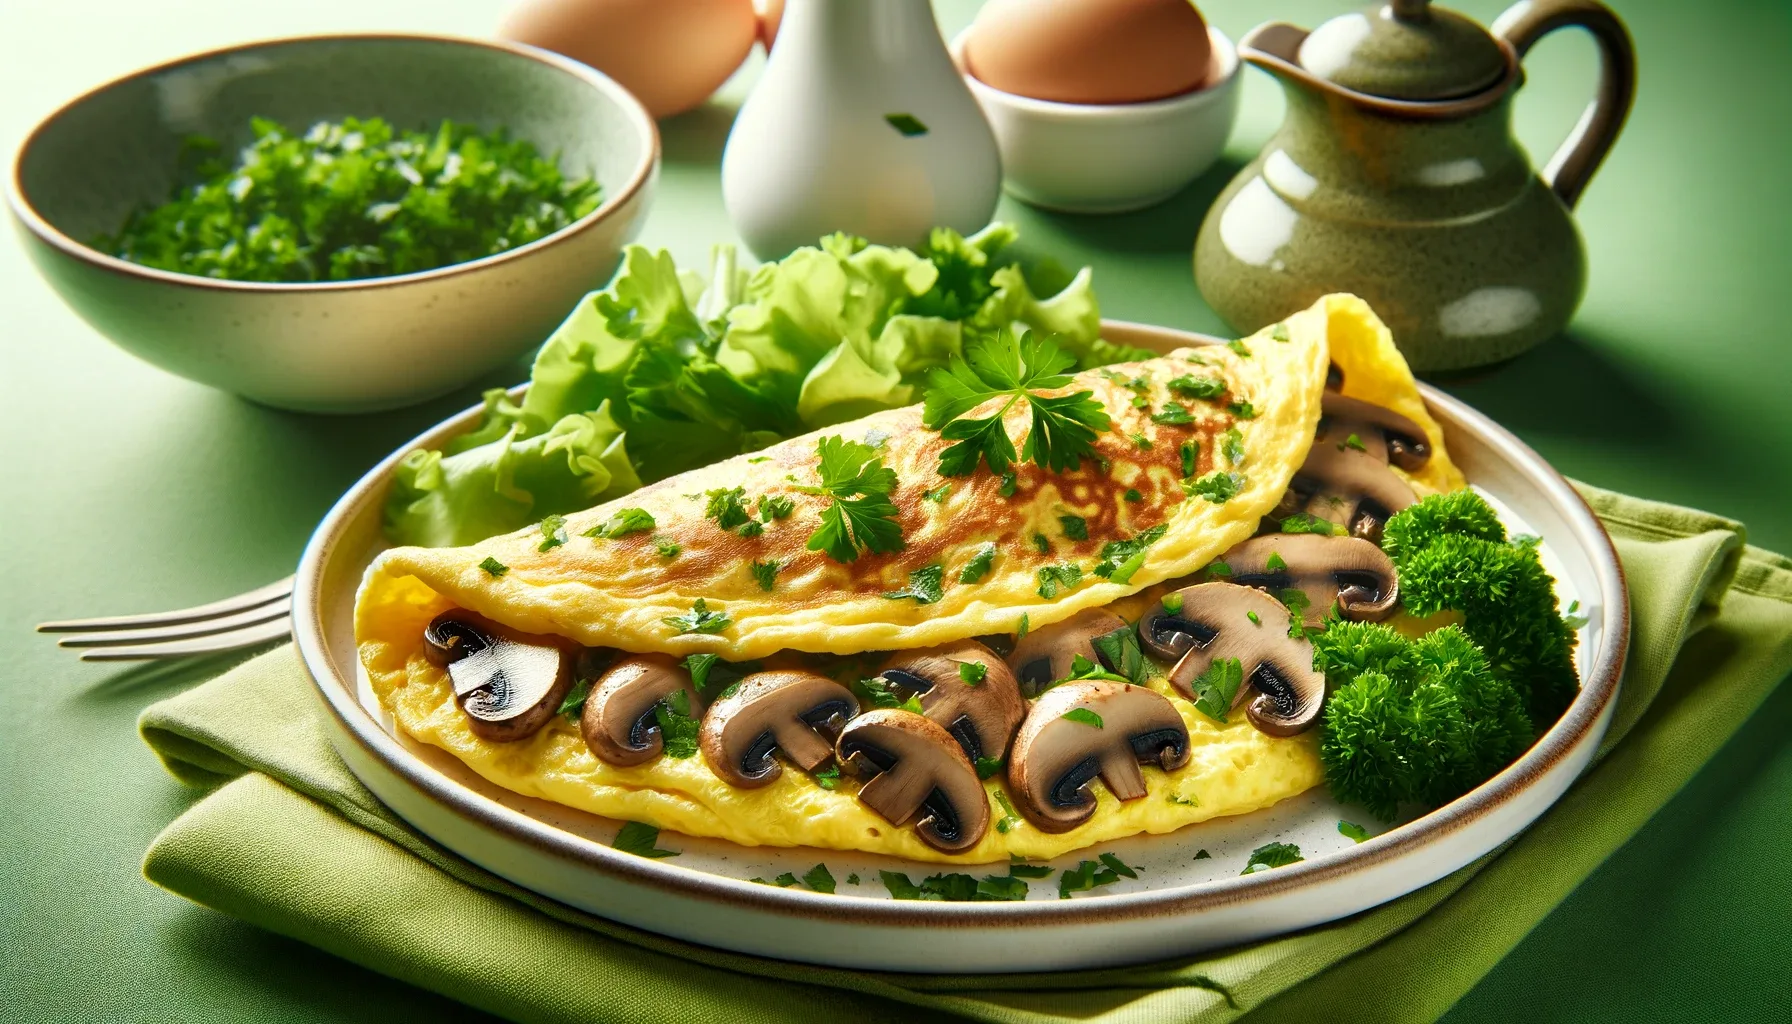 An image of a plate featuring a keto omelette with mushrooms and salad.